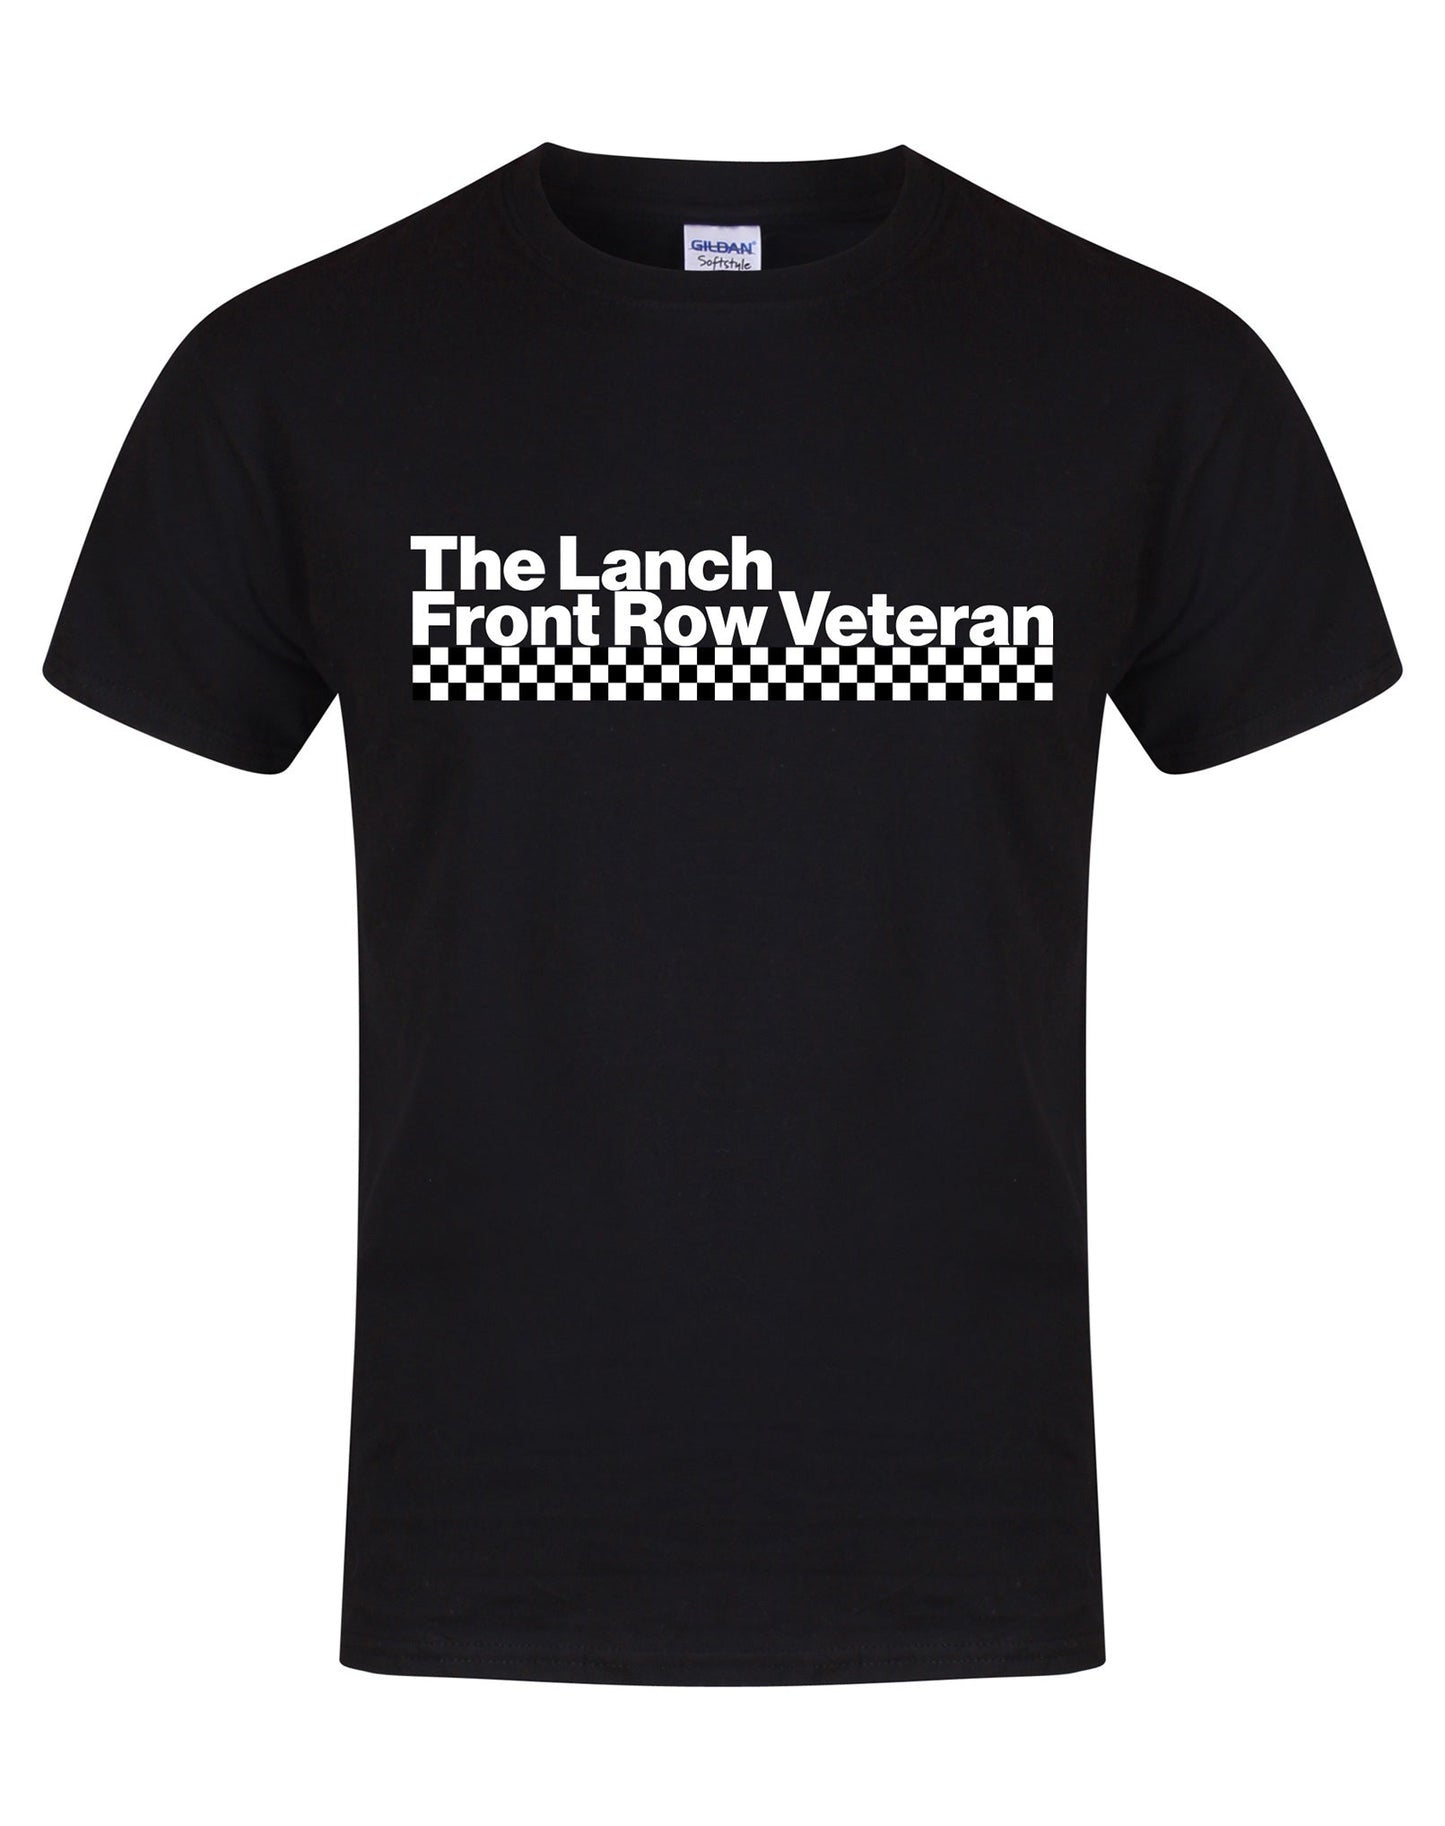 The Lanch - Front Row Veteran - unisex fit T-shirt - various colours - Dirty Stop Outs